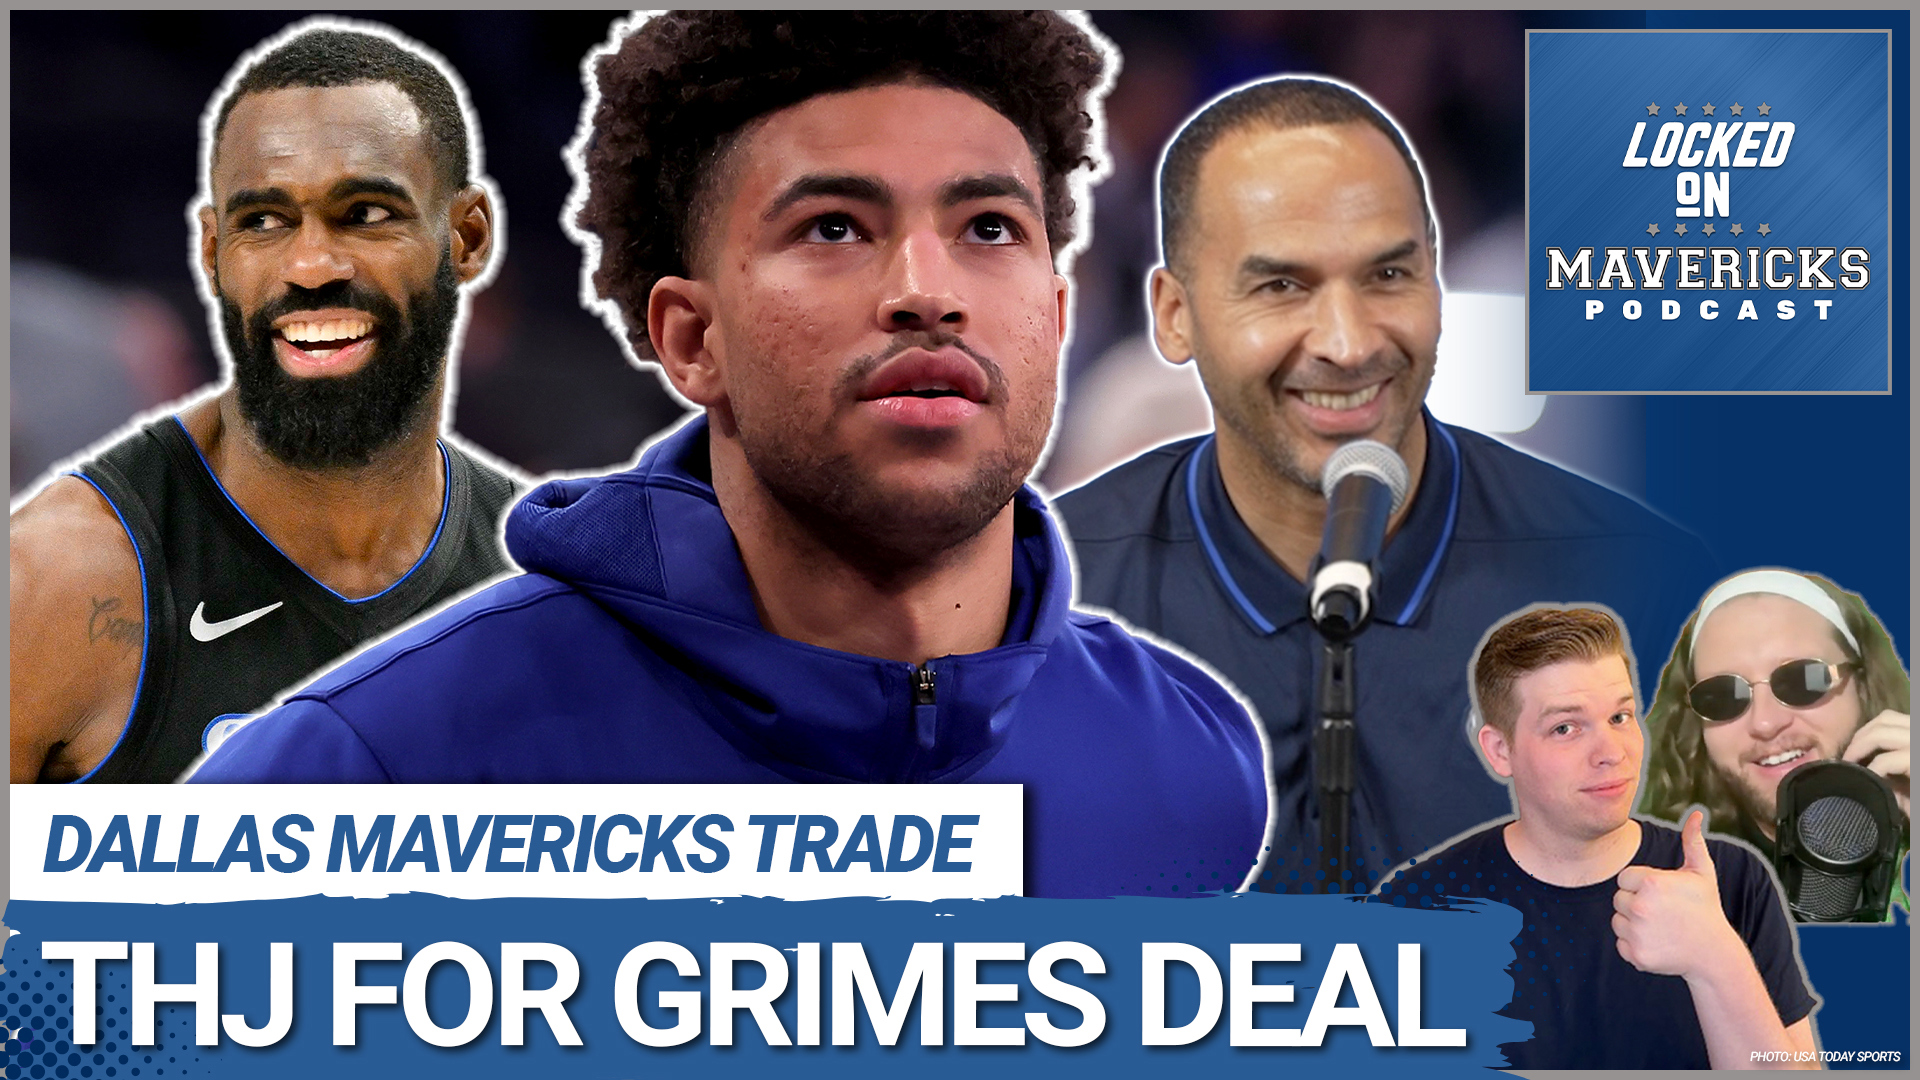 Nick Angstadt and Slightly Biased the Tim Hardaway Jr. for Quentin Grimes trade and what does for the Dallas Mavericks, plus other rumors about Klay Thompson.